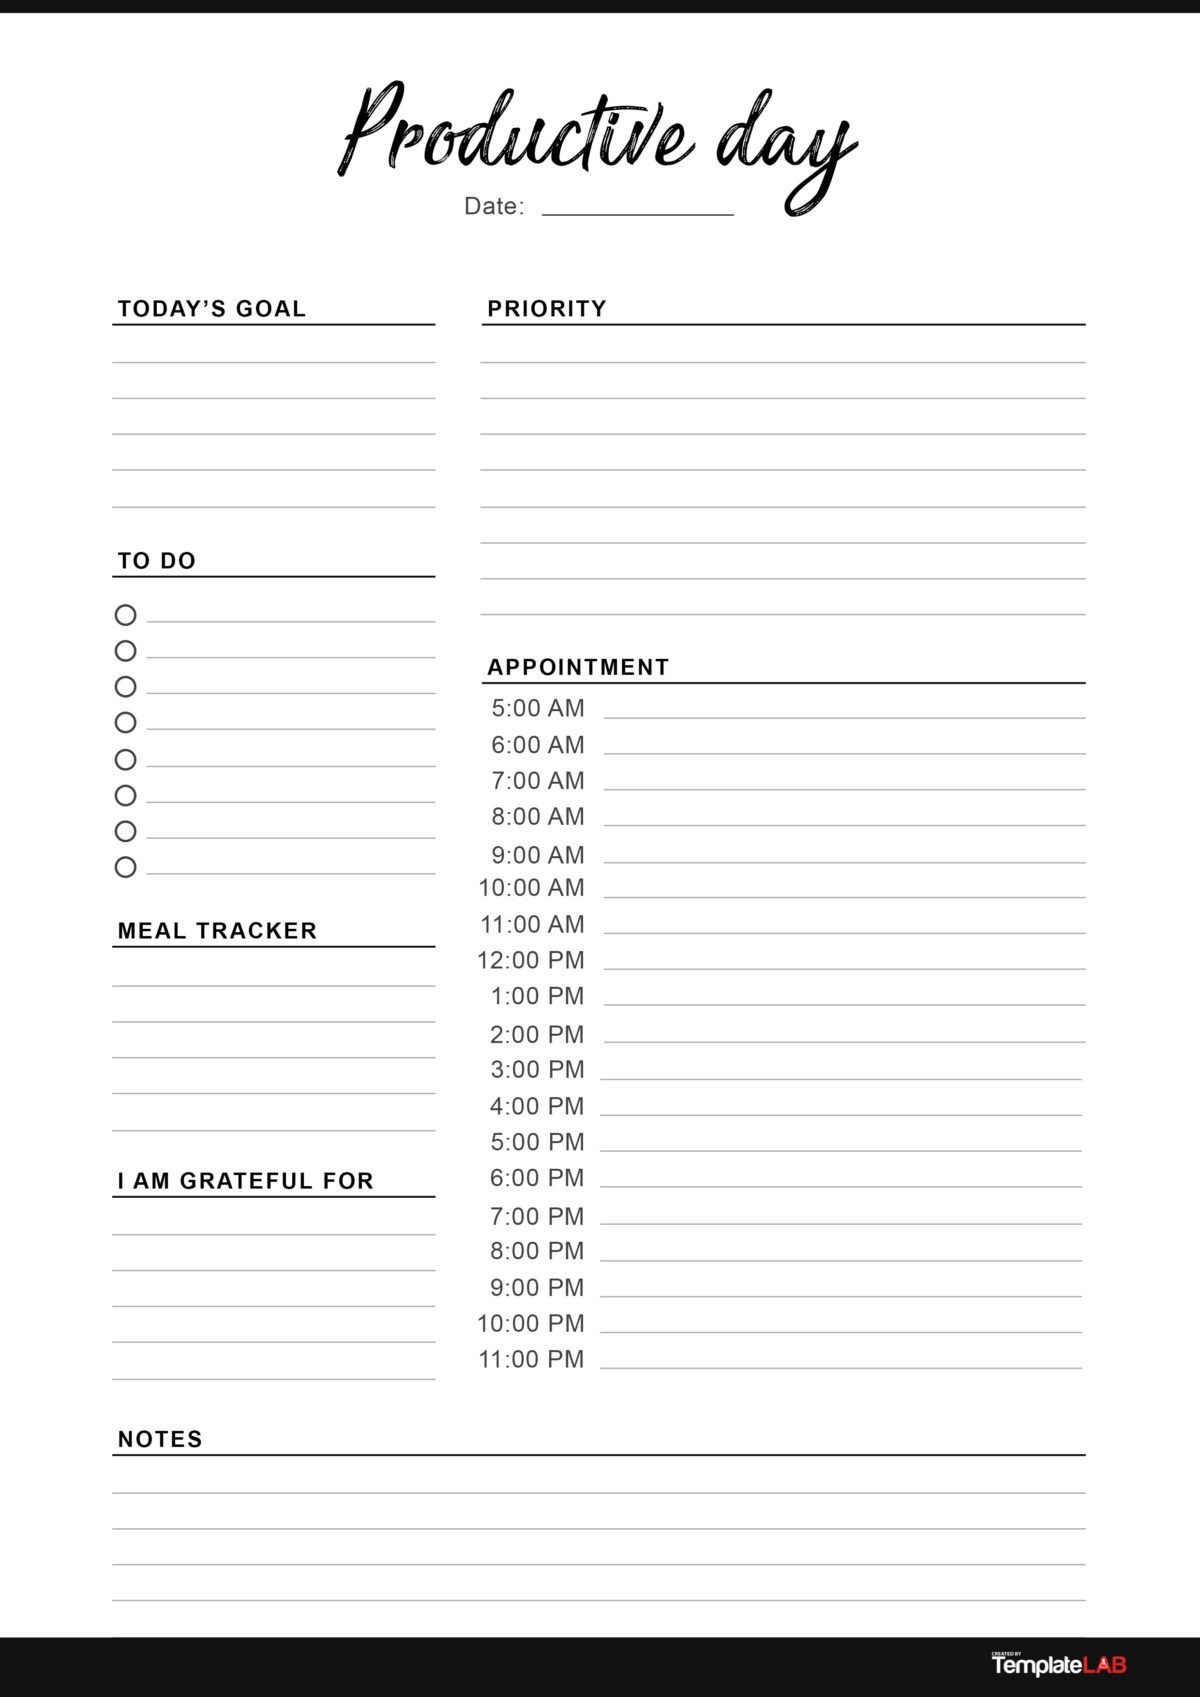 Daily Schedule Template Printable from templatelab.com